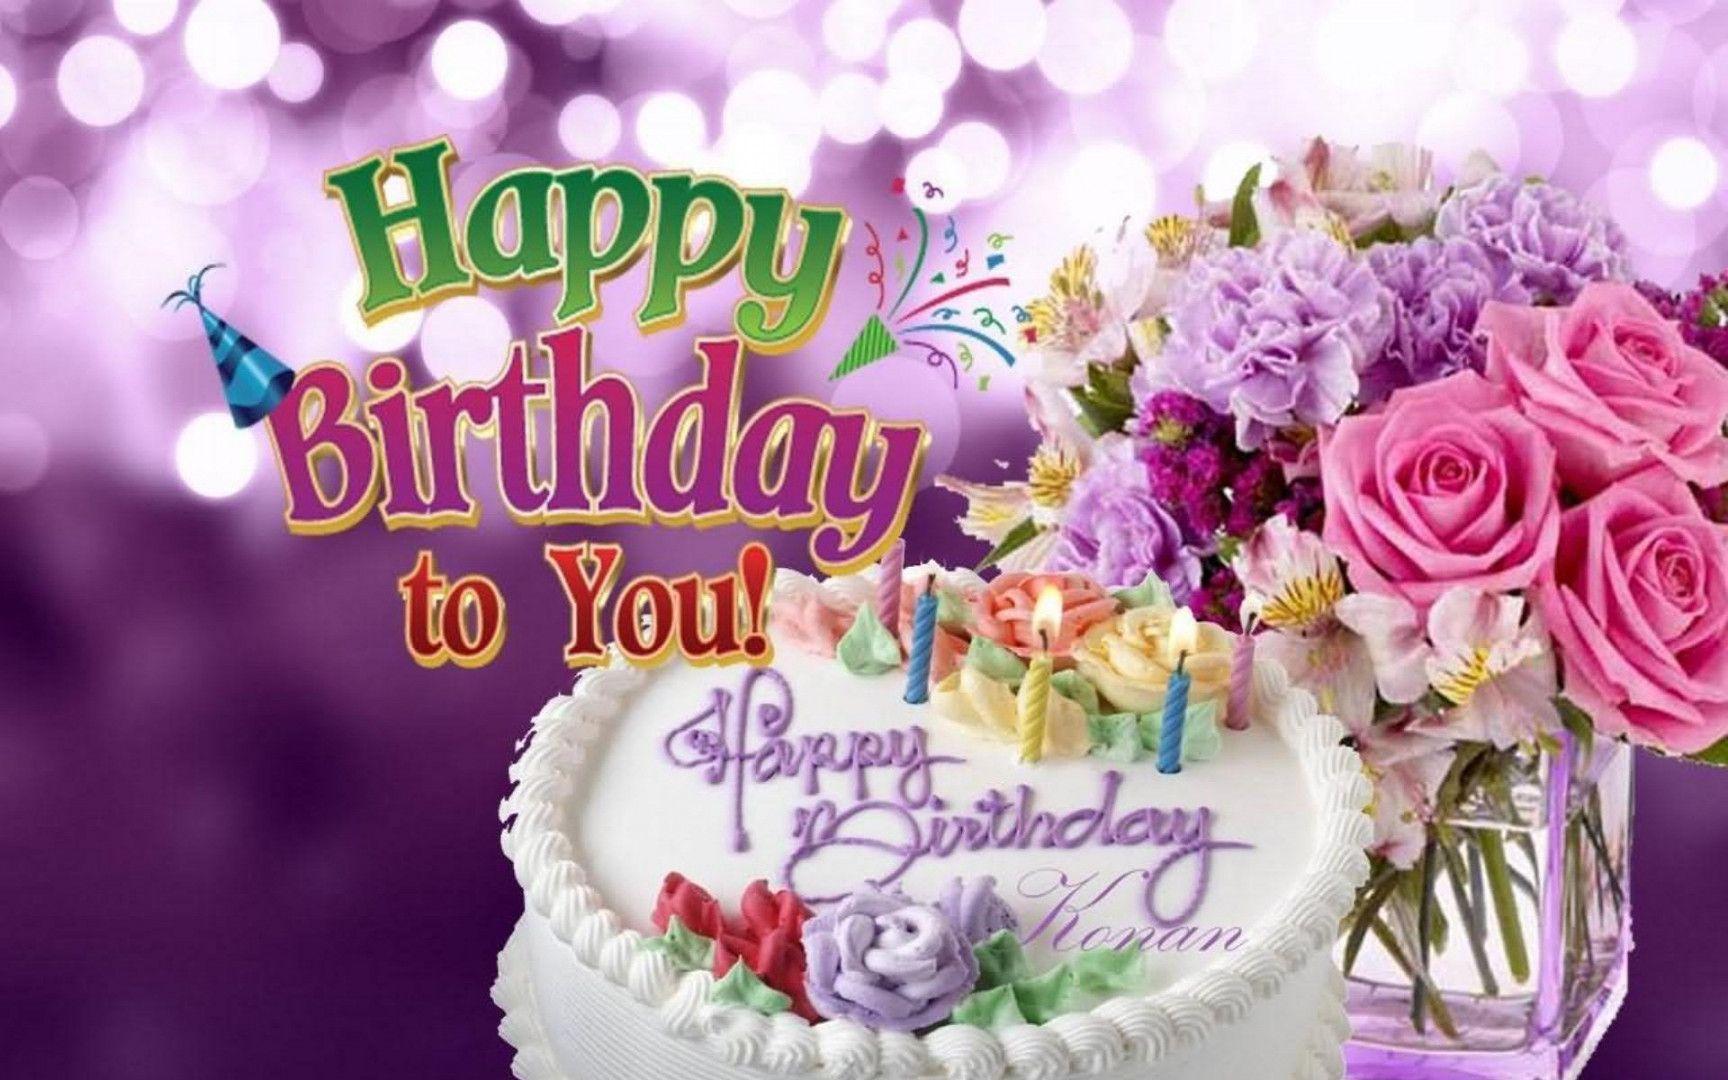 Happy Birthday Wishes Image Free Download